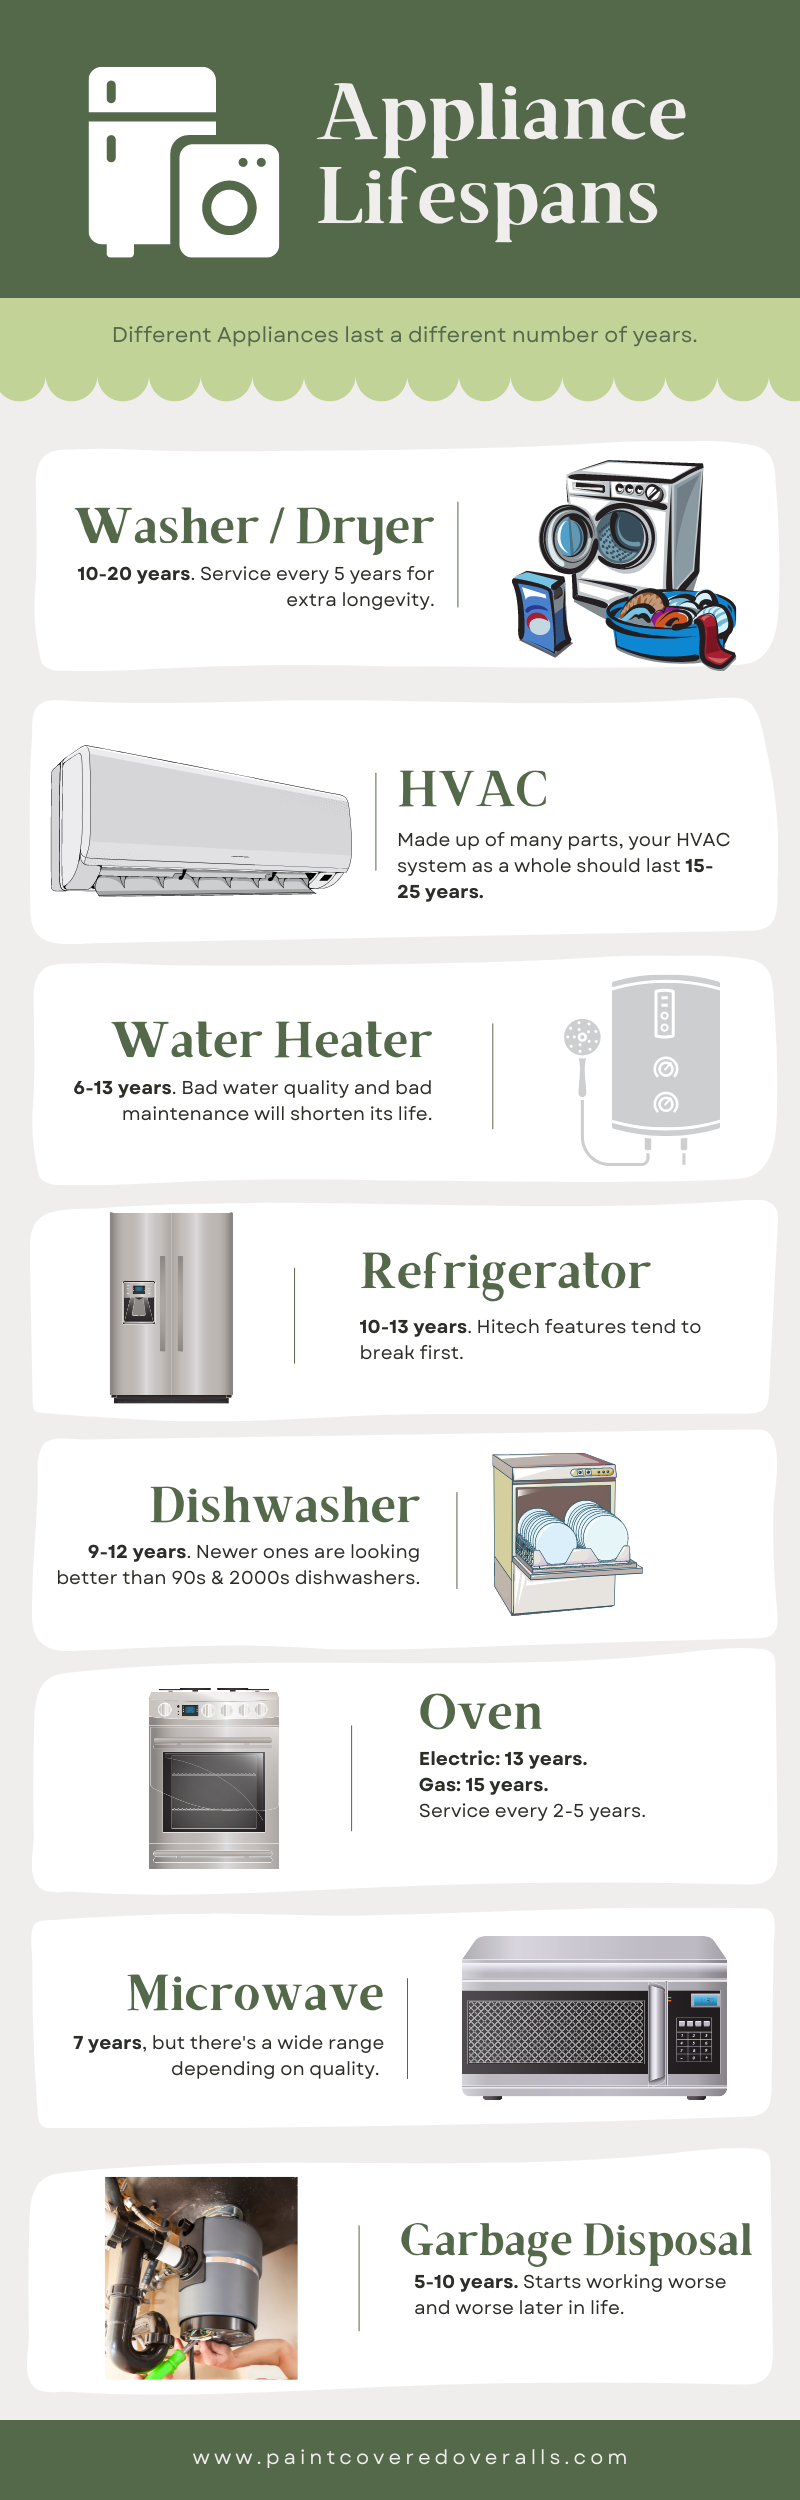 Appliance Lifespans Infographic - Paint Covered Overalls - Durham NC